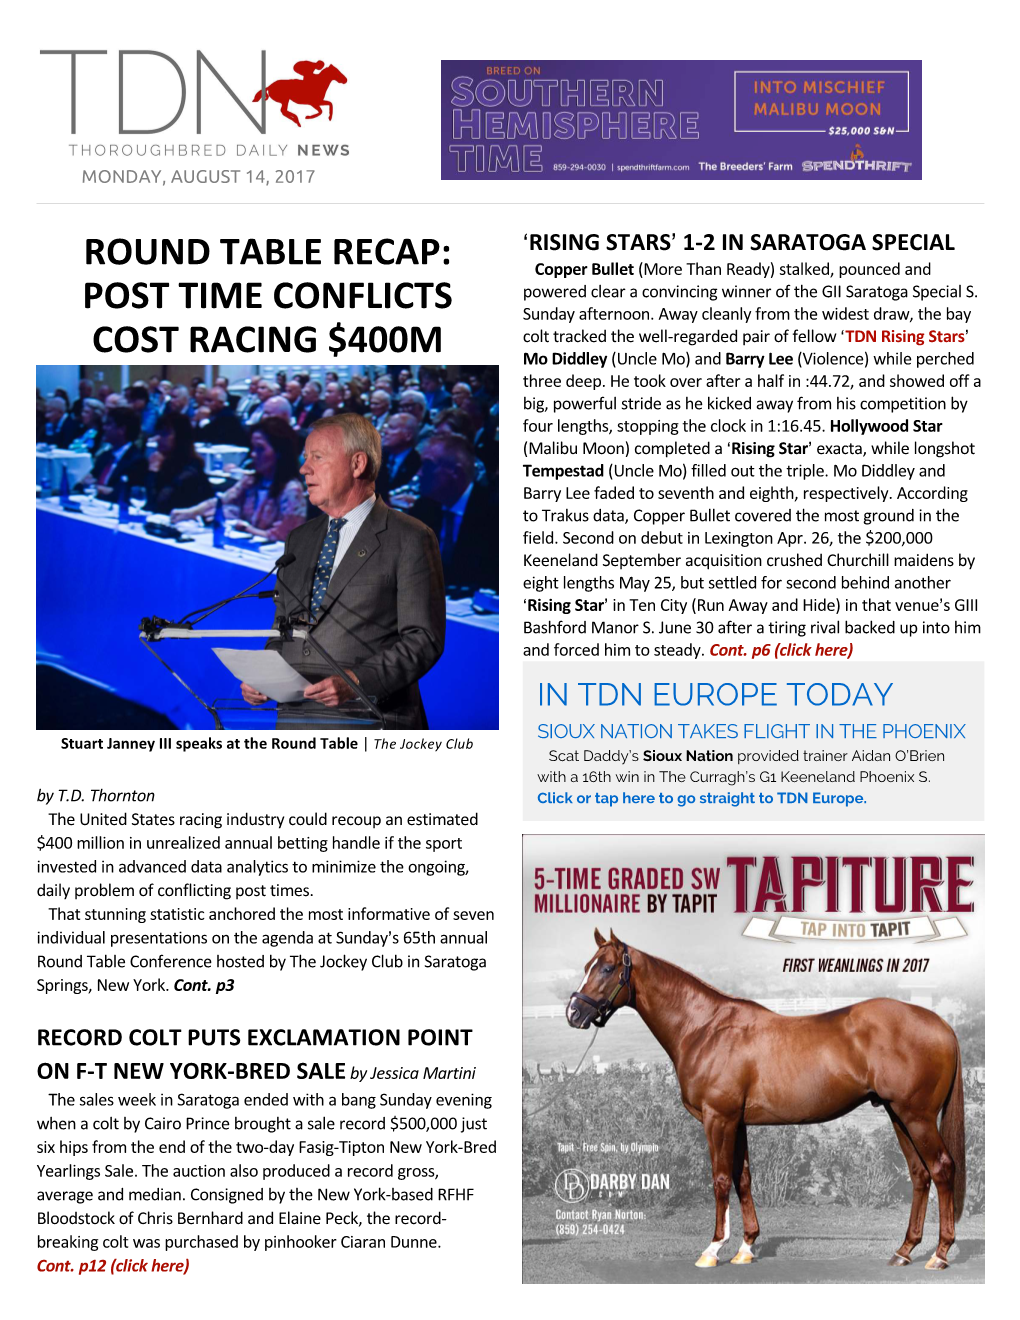 Round Table Recap: Post Time Conflicts Cost Racing $400M